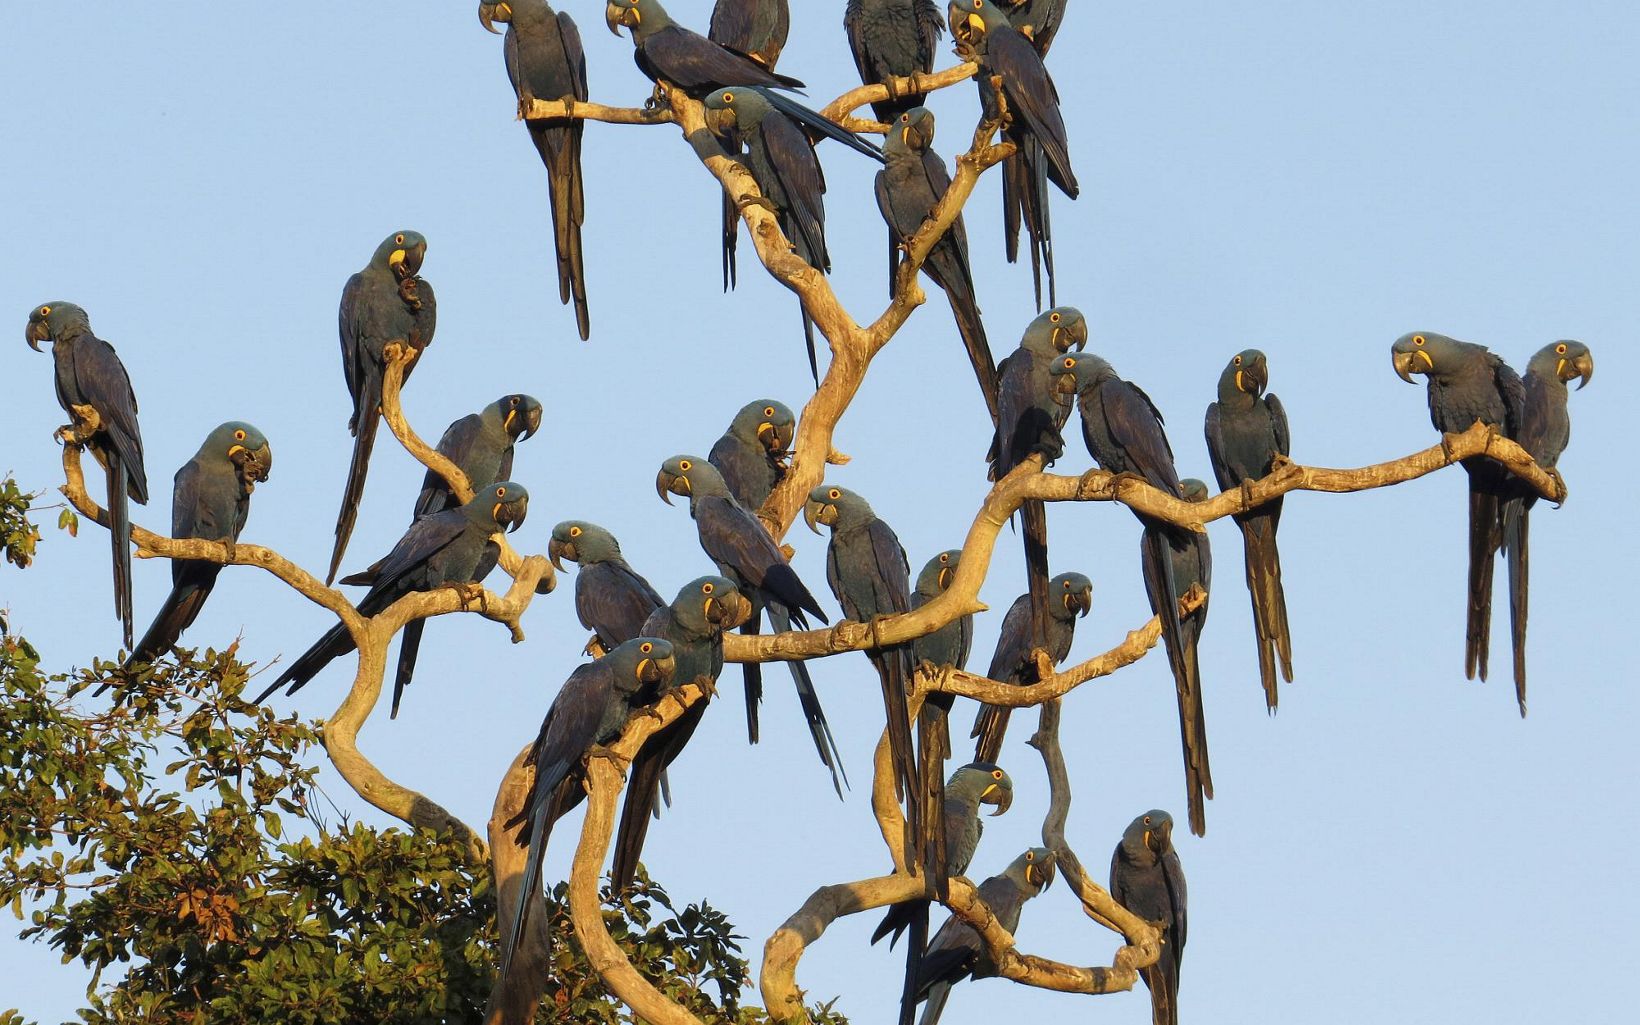 A large group of blue macaws sitting in a tree.